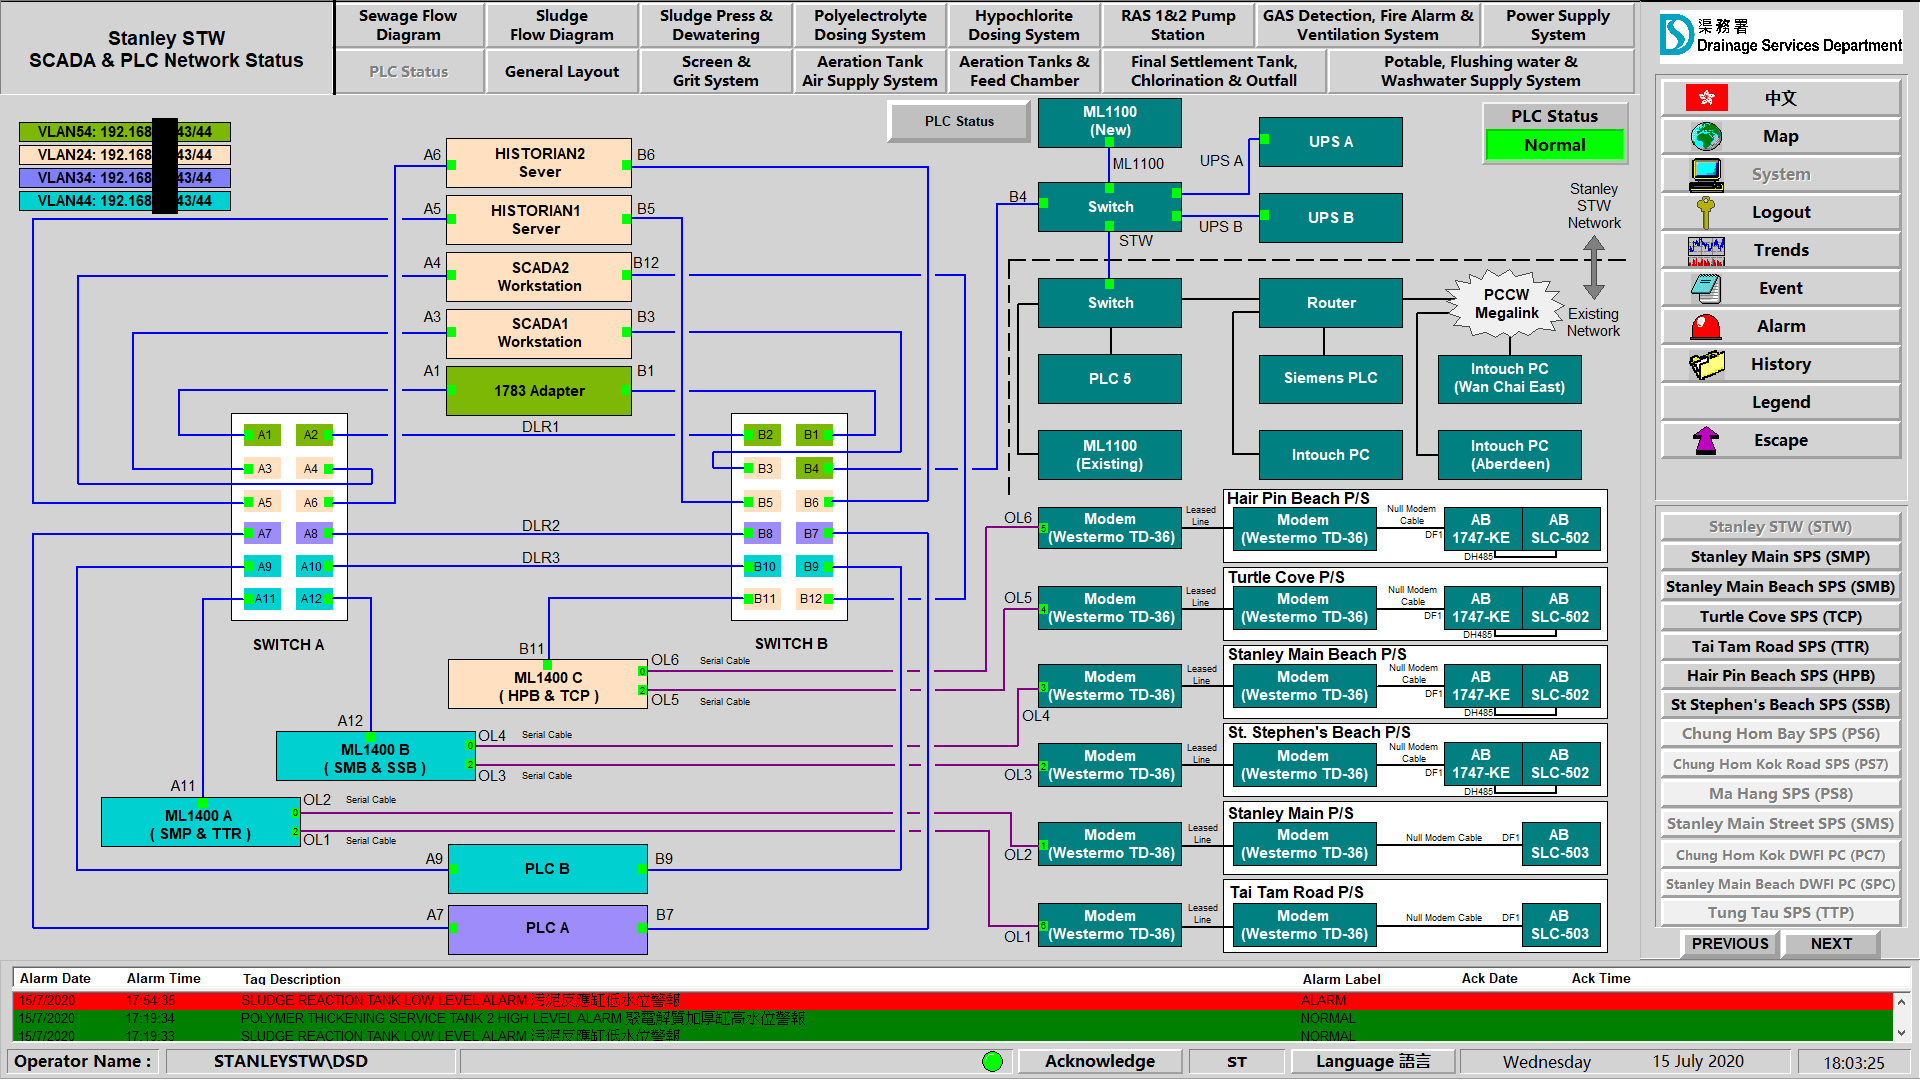 New SCADA & PLC Network Diagram screenshot from FactoryTalk View After Works in DSD Stanley STW